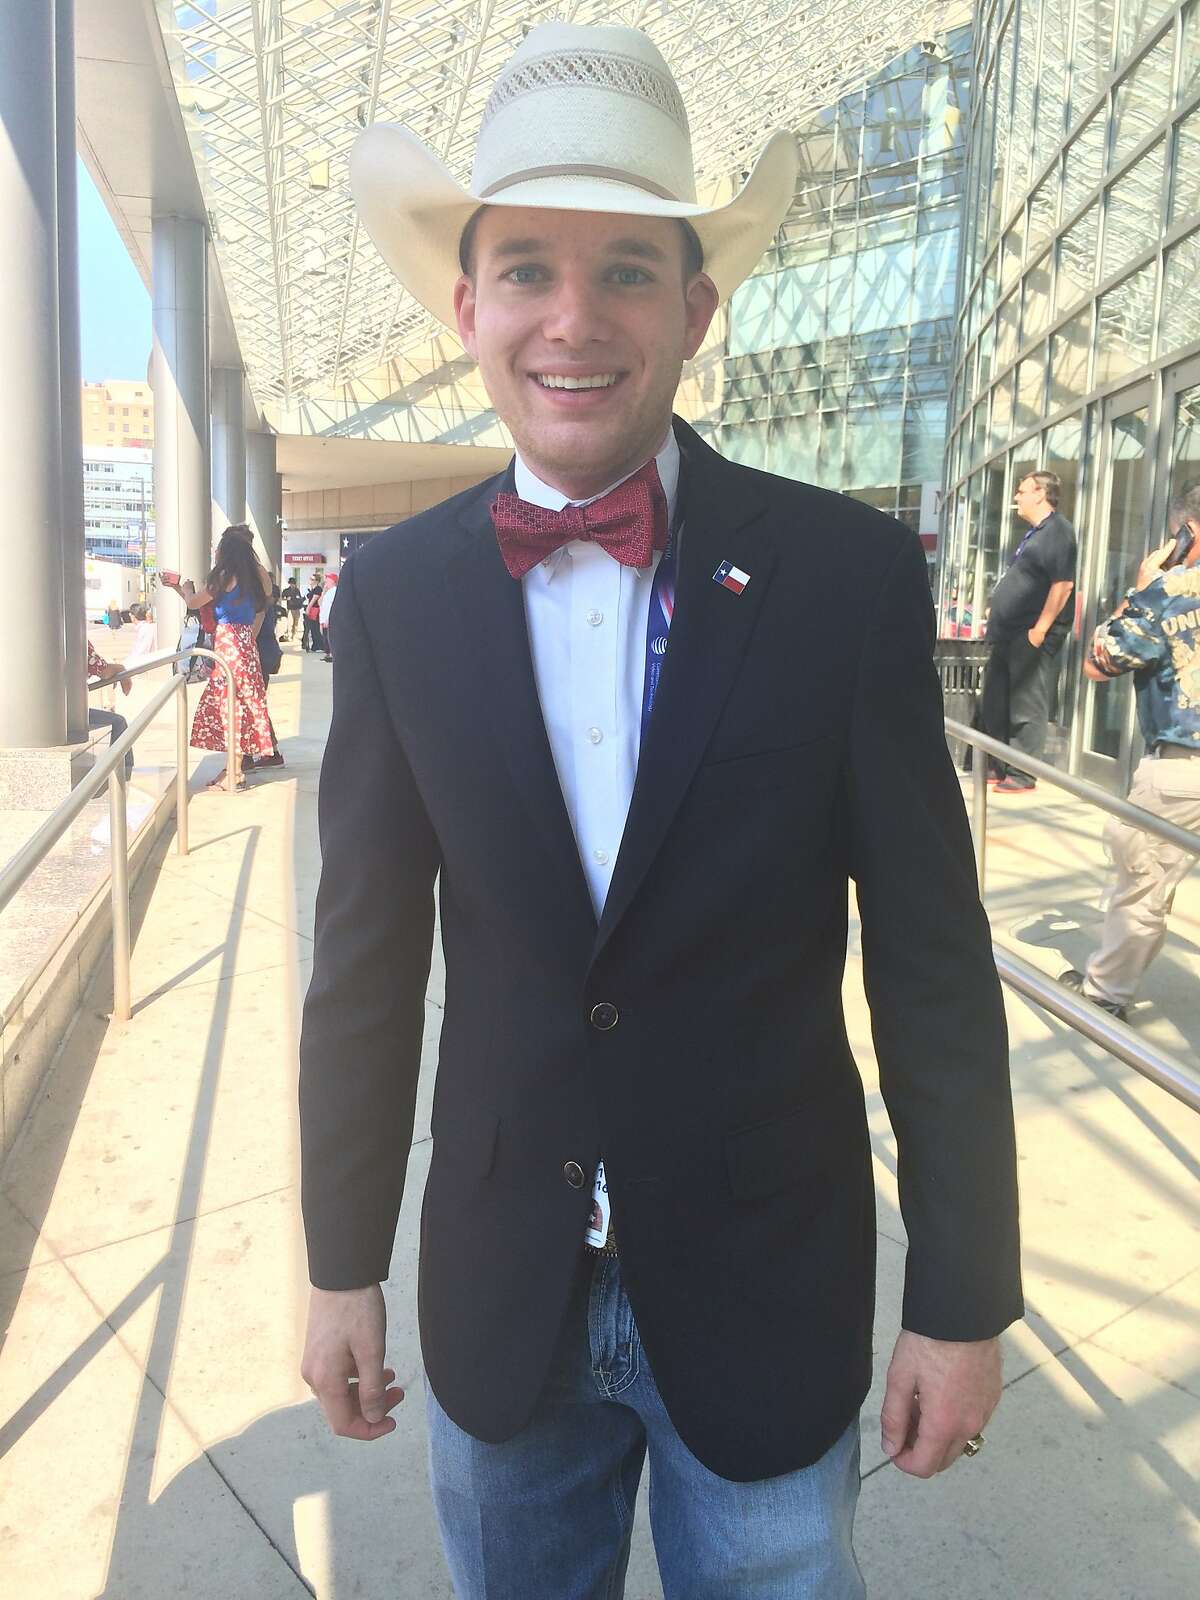 Colton Buckley, a Log Cabin Republican, is a Texas delegate at the Republican National Convention in Cleveland, Ohio, on July 19, 2016.